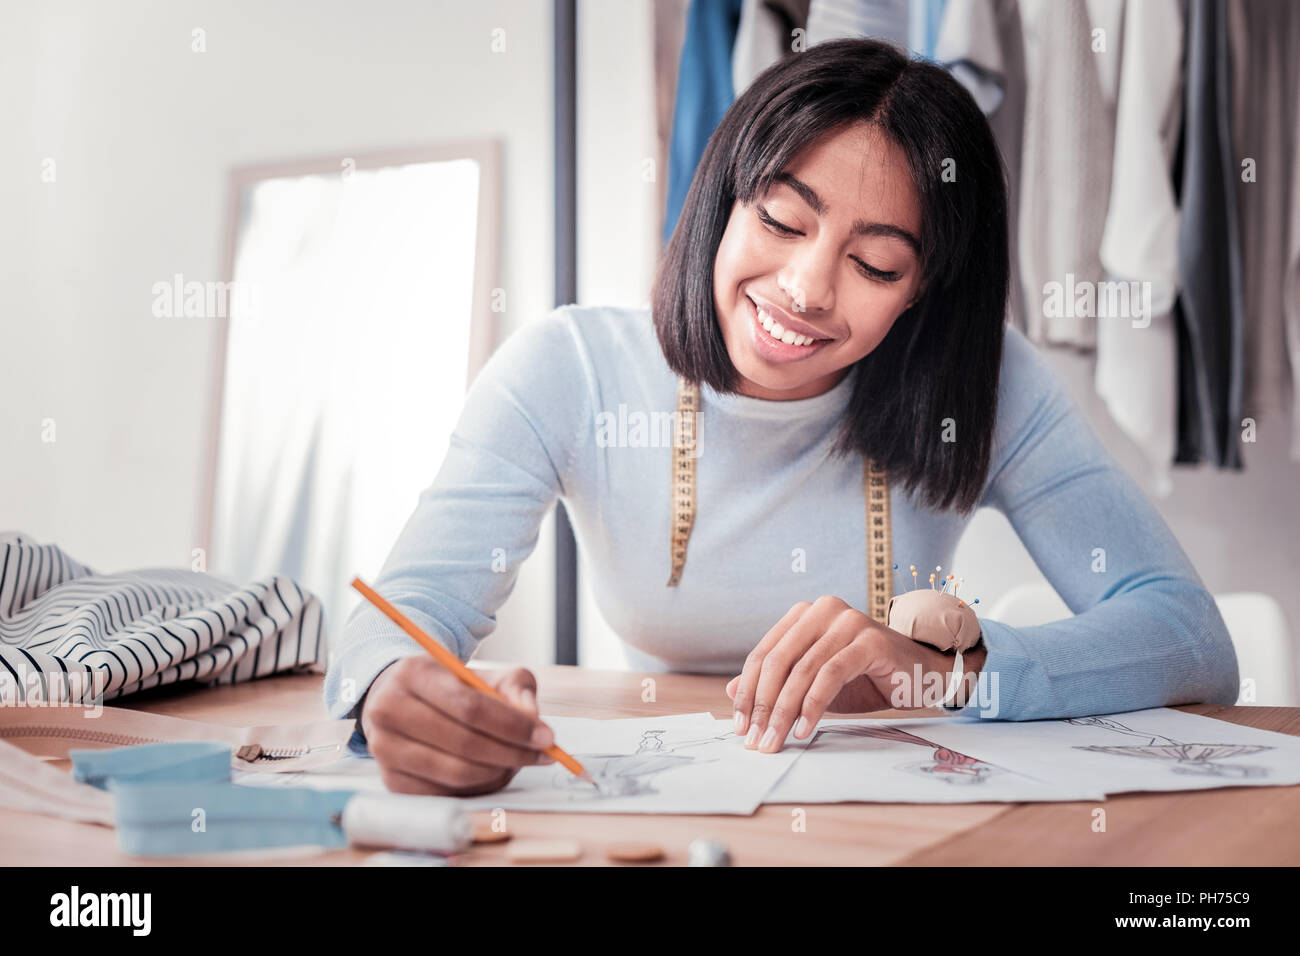 Portrait of charming dressmaker creating sketches Stock Photo